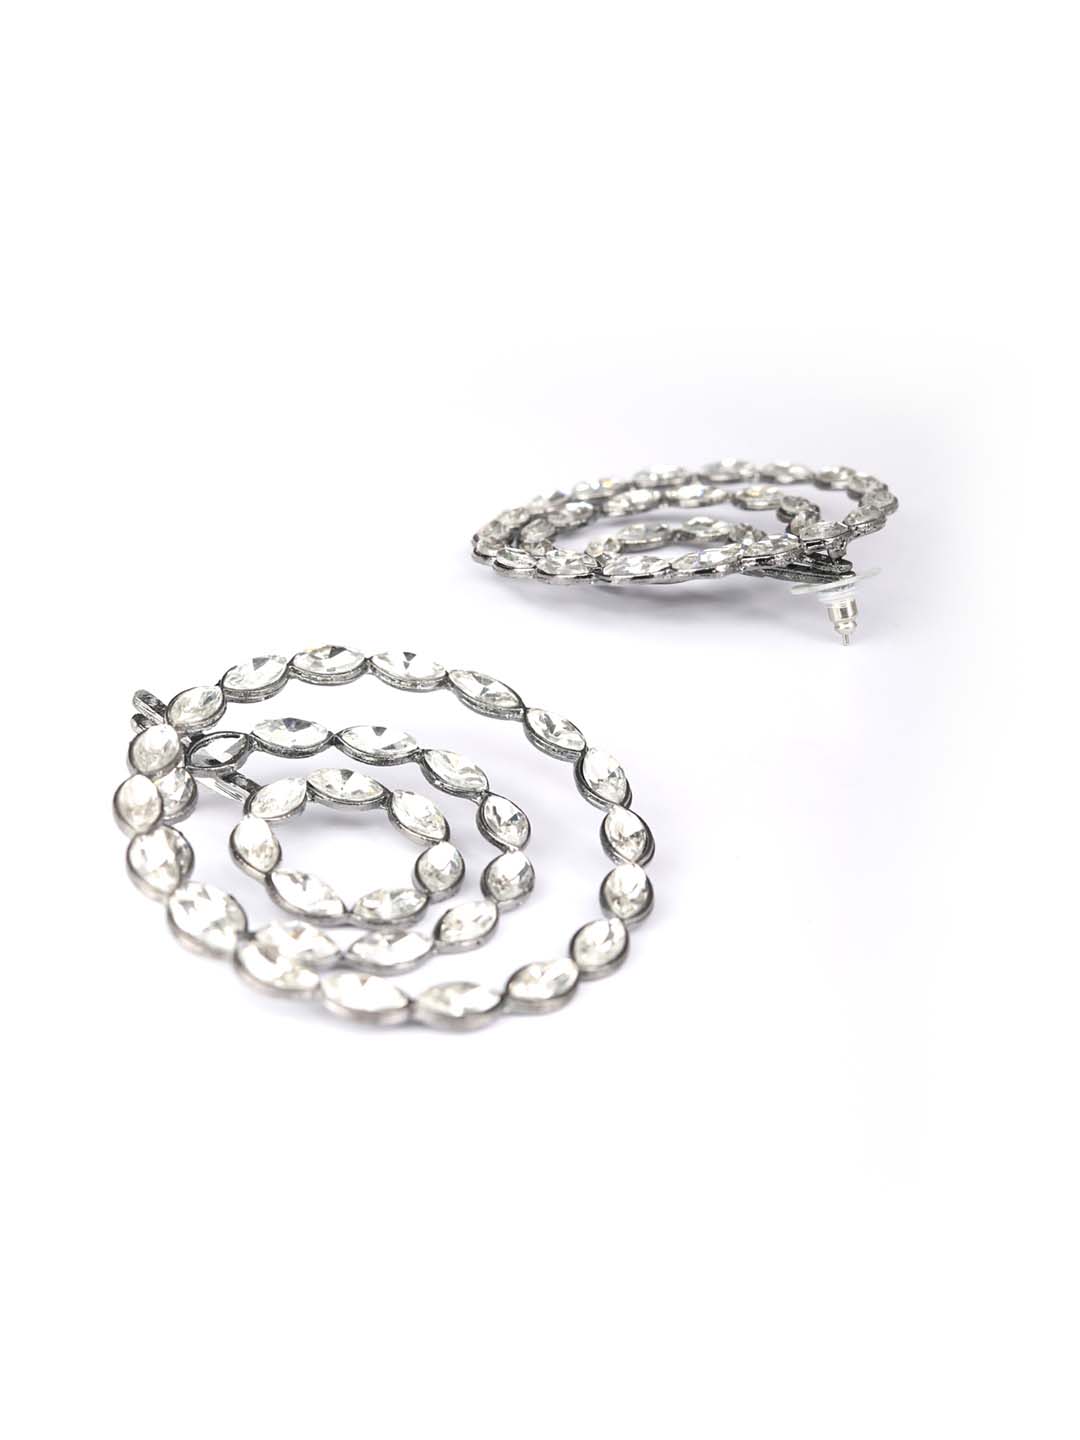 Stone Studded Silver Plated Spherical Hoop Earring